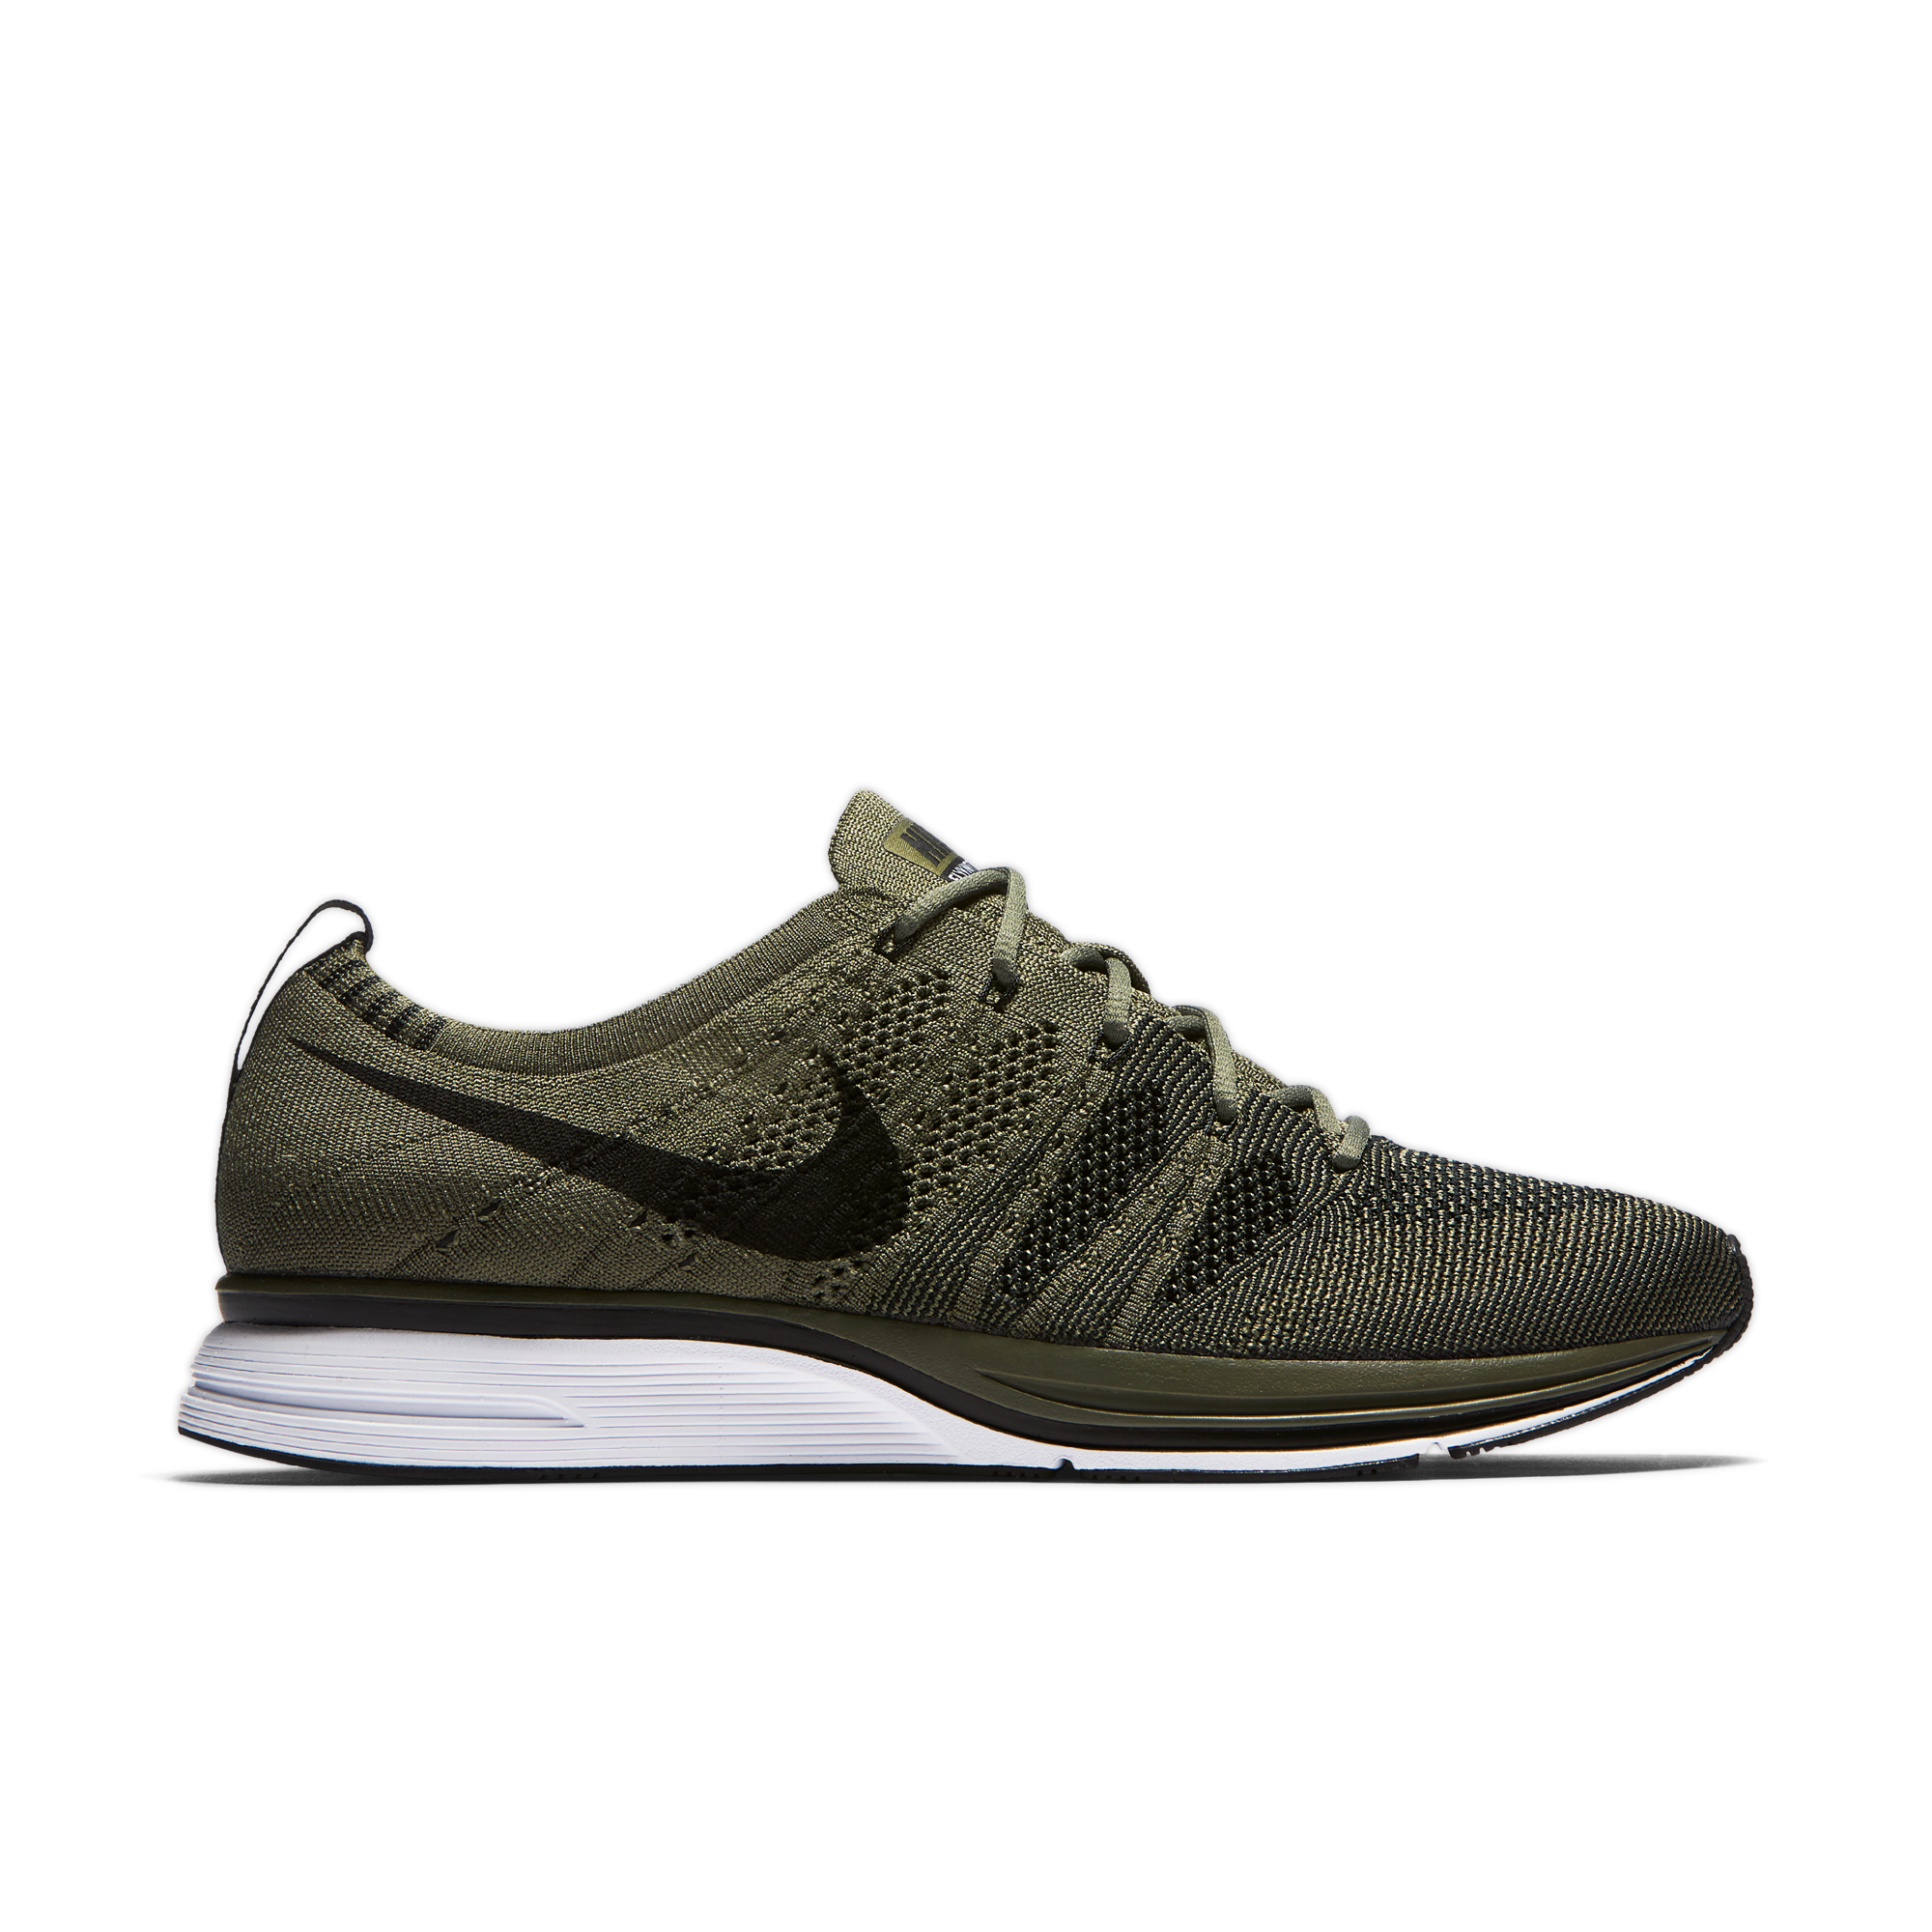 flyknit trainer olive green